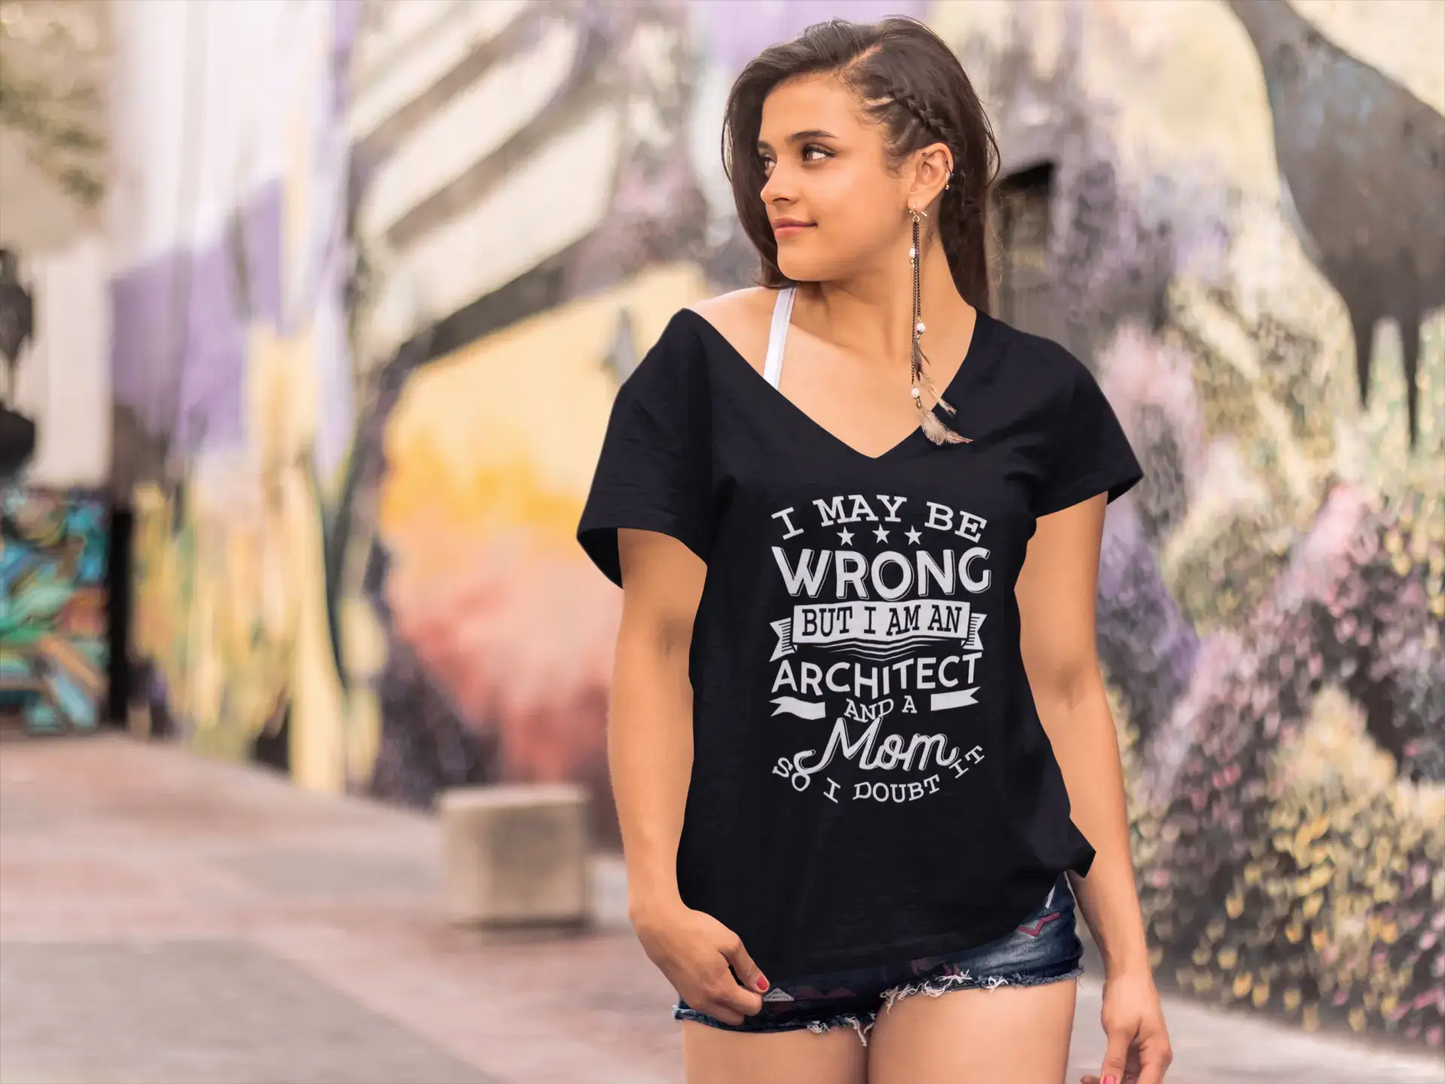 ULTRABASIC Women's T-Shirt I May be Wrong but I am an Architect and a Mom - Short Sleeve Tee Shirt Tops